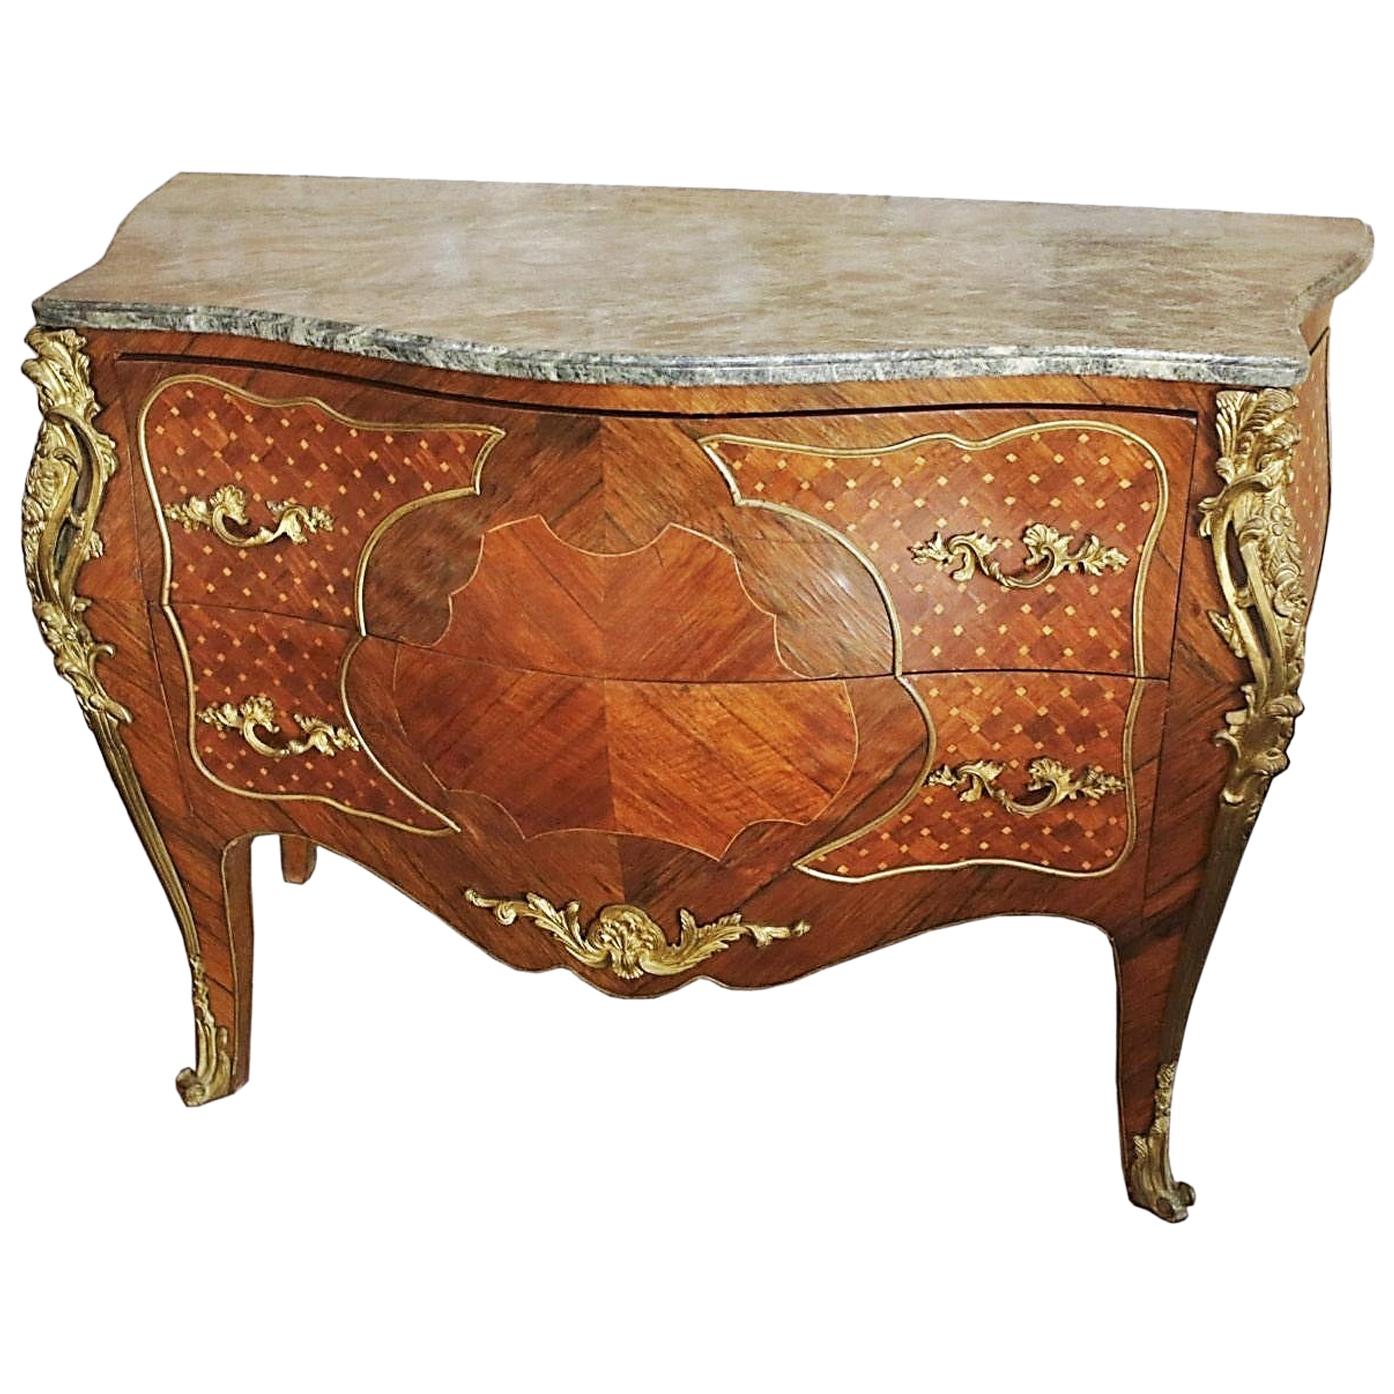 20th Century French Louis XV Inlaid Marble and Ormolu Bombe Commode For Sale